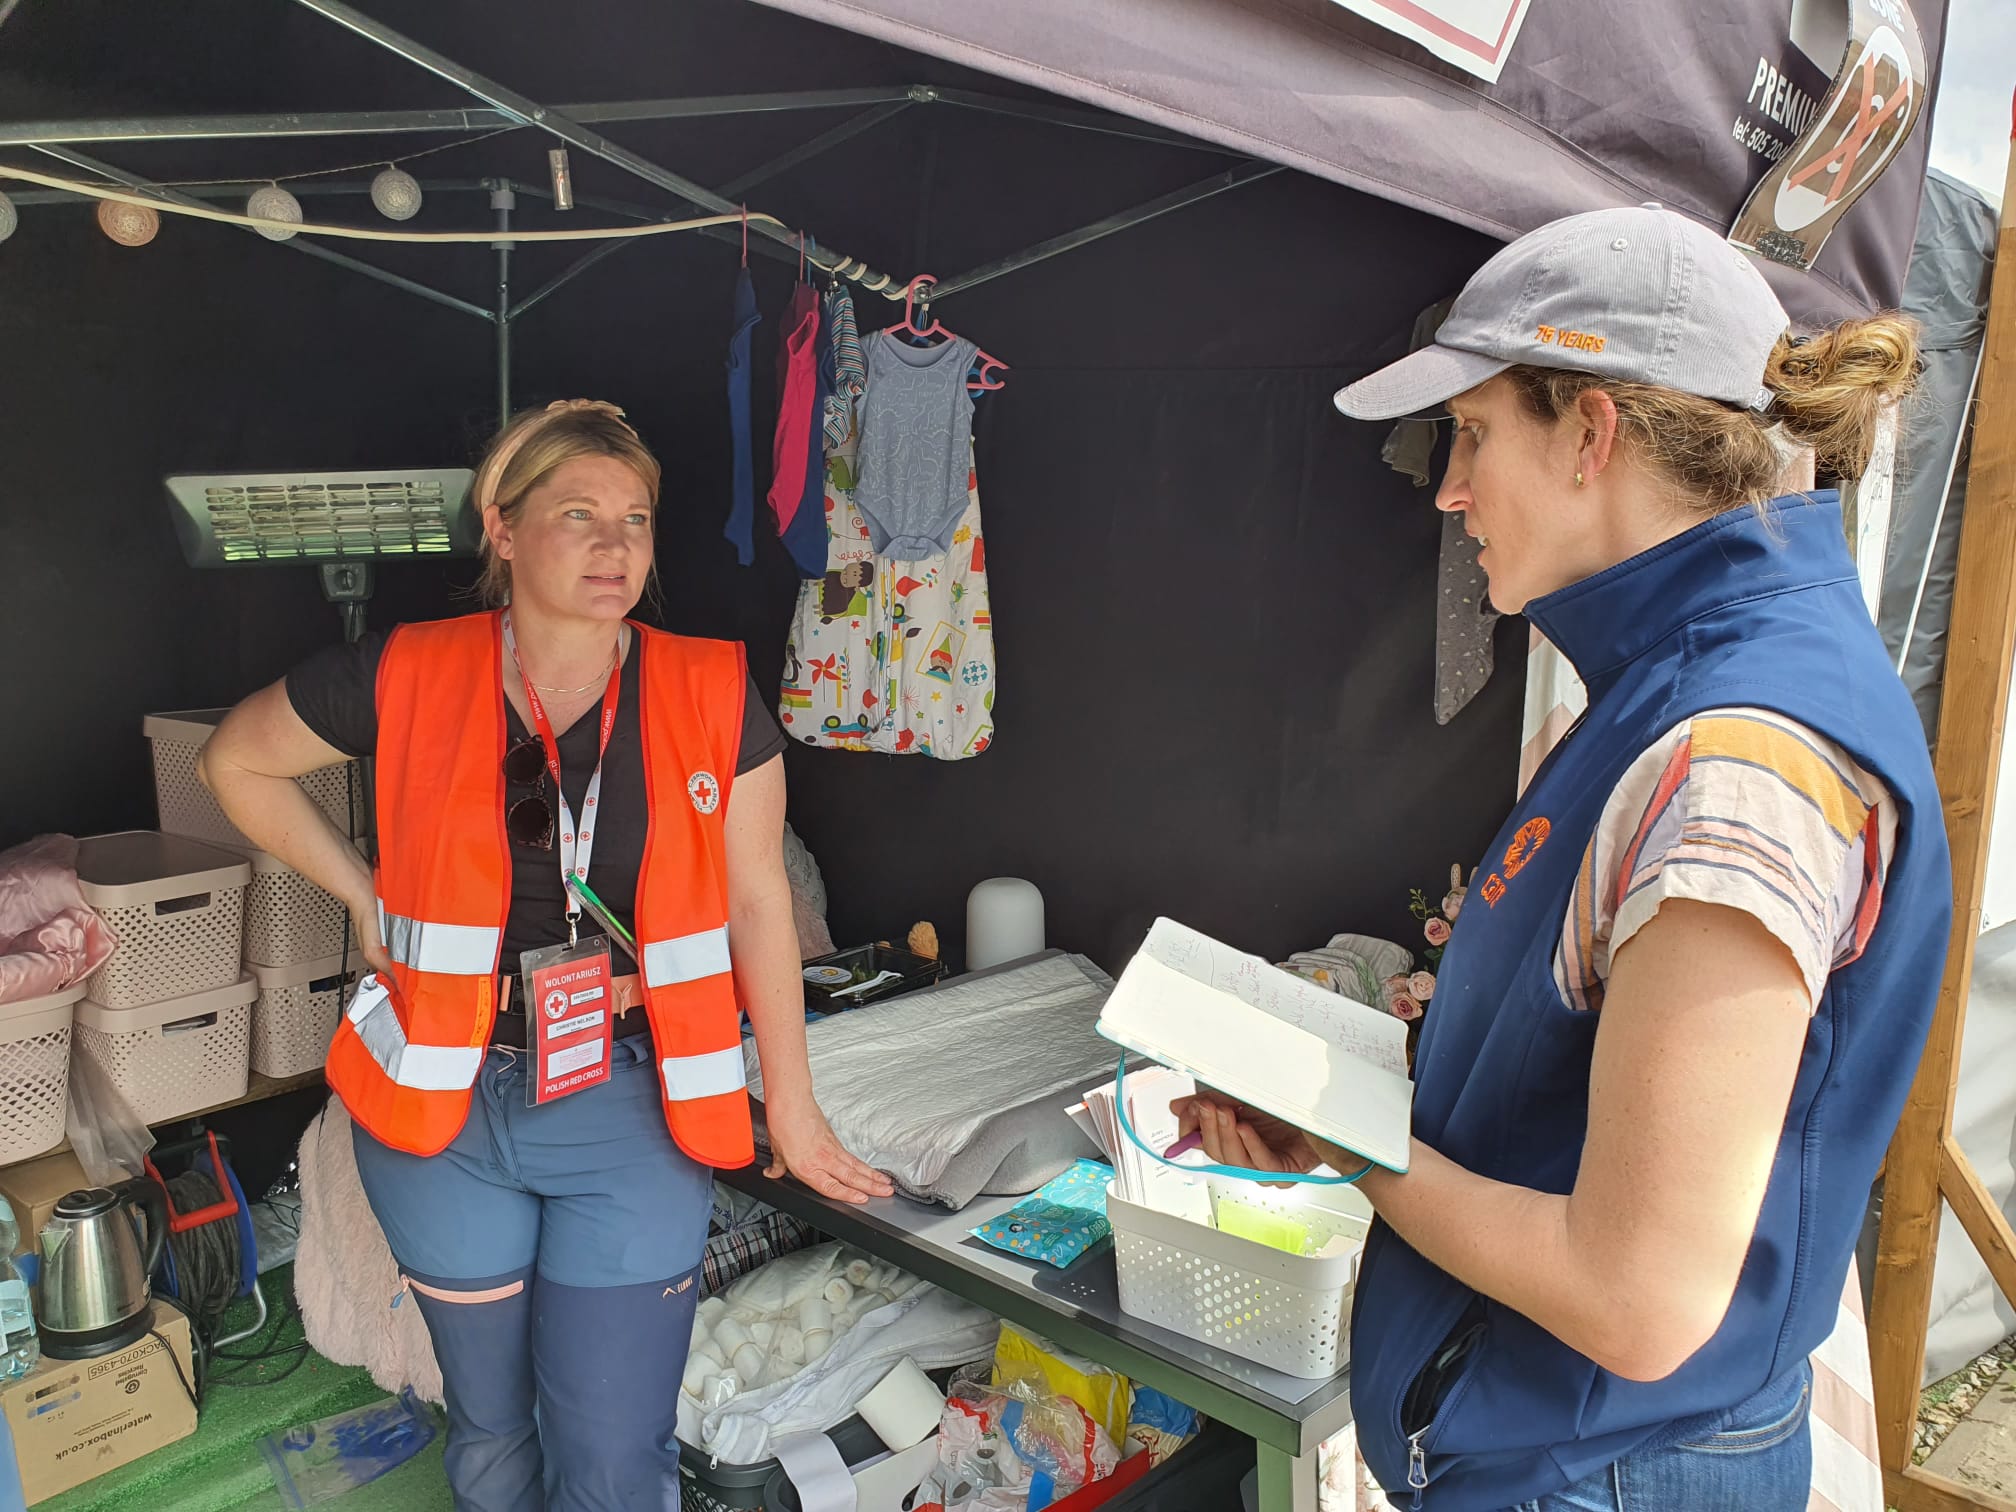 Women working in Poland to help Ukrainian refugees with their needs